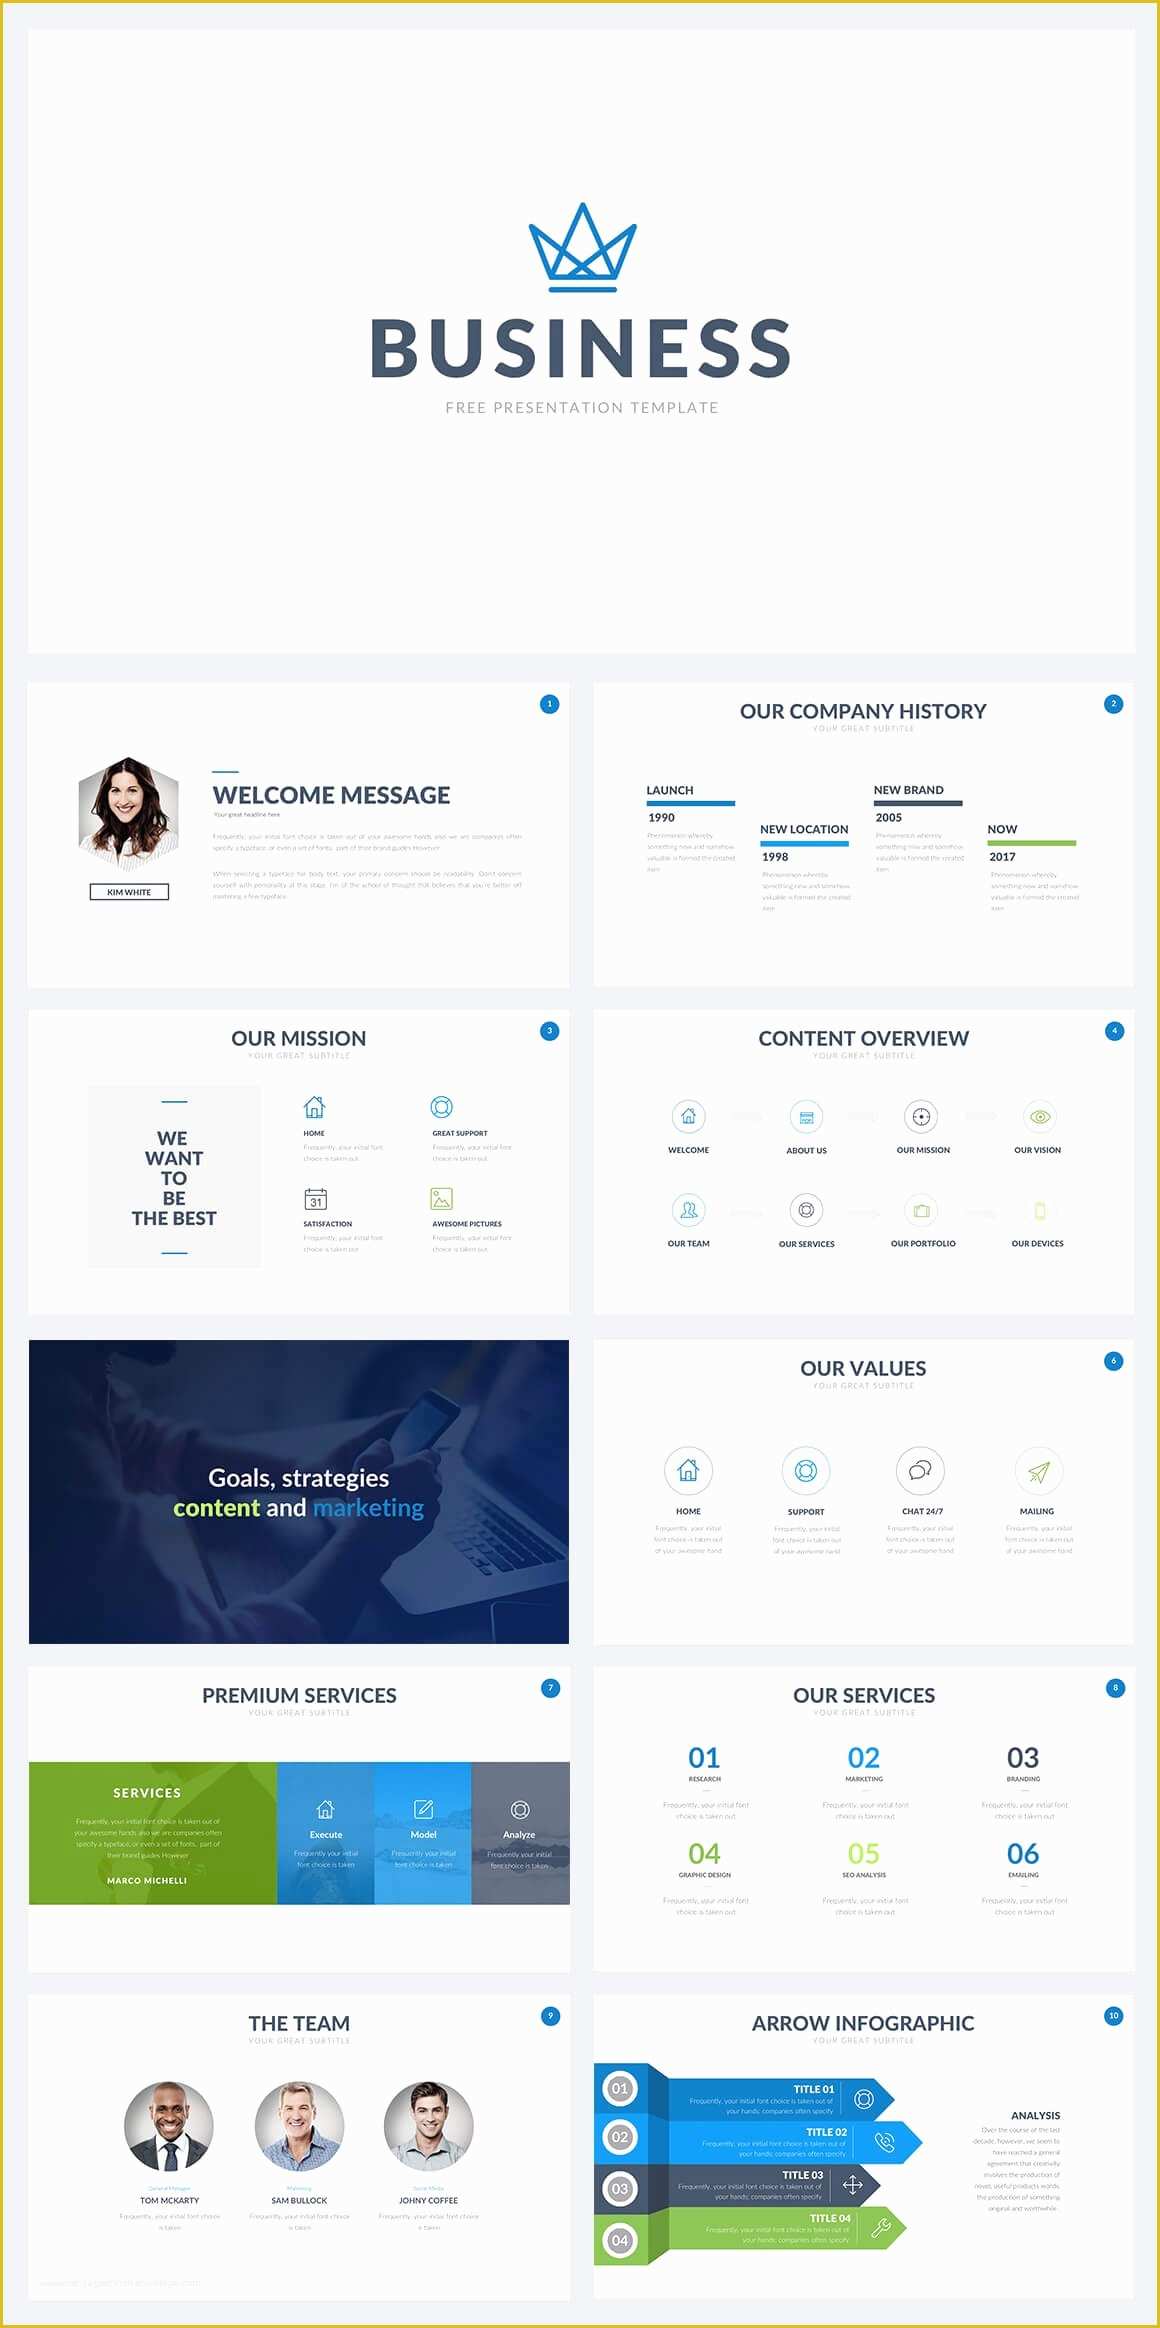 Free Powerpoint Template Design 2017 Of 40 Free Cool Powerpoint Templates for Presentations